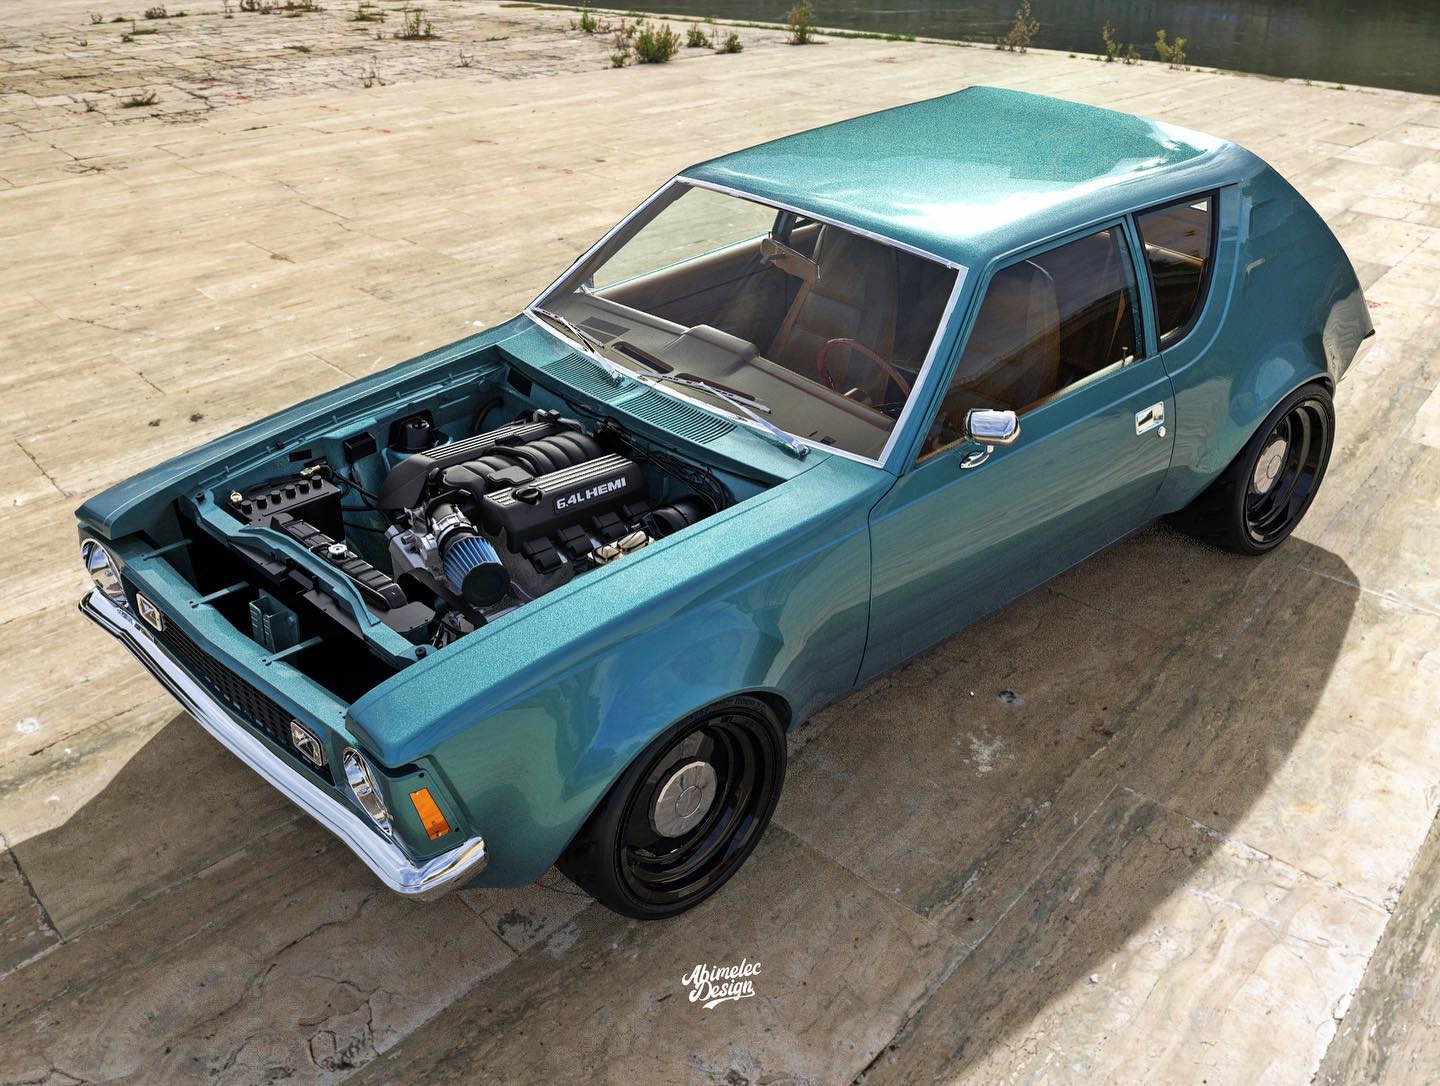 Imaginary Amc Gremlin Restomod Looks Infinitely Better With A Shorter Front Overhang Carscoops